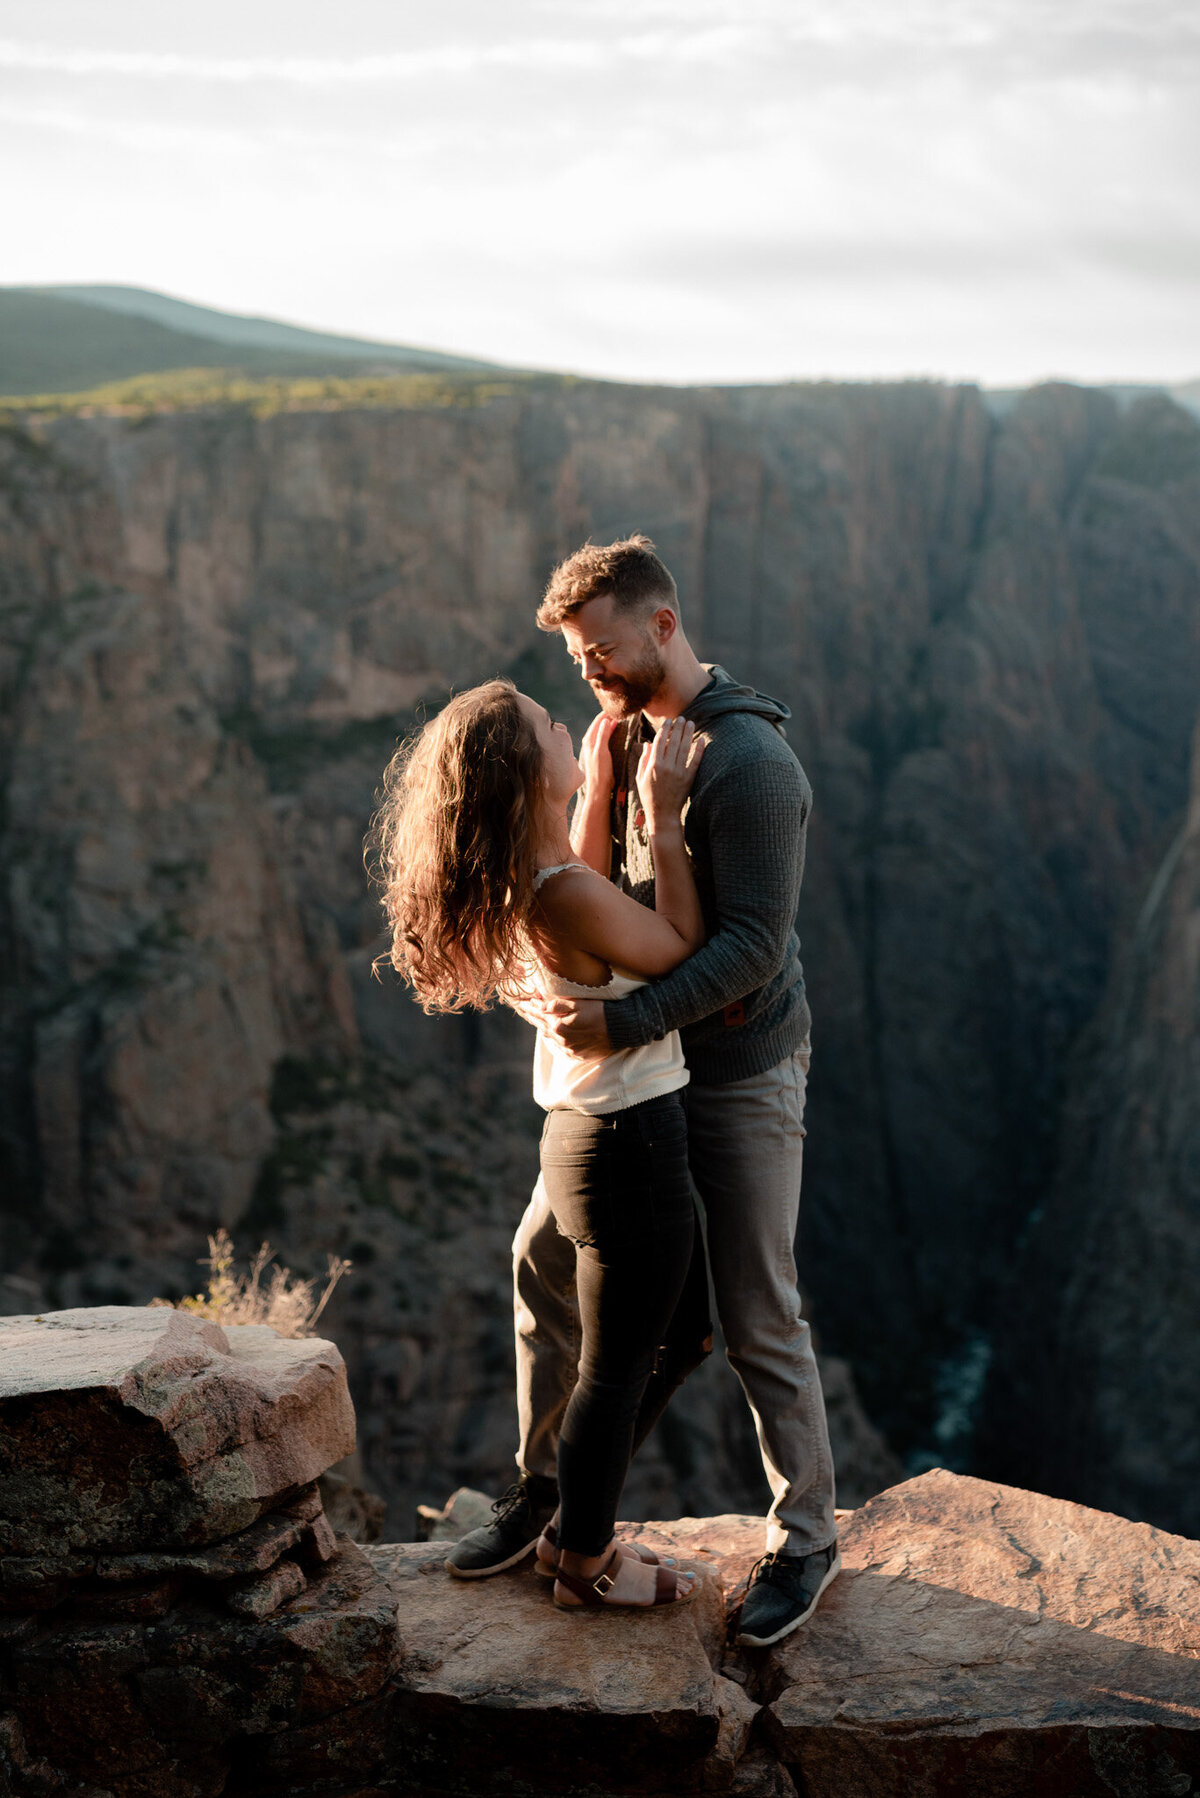 Colorado couple recently engaged pictured embracing